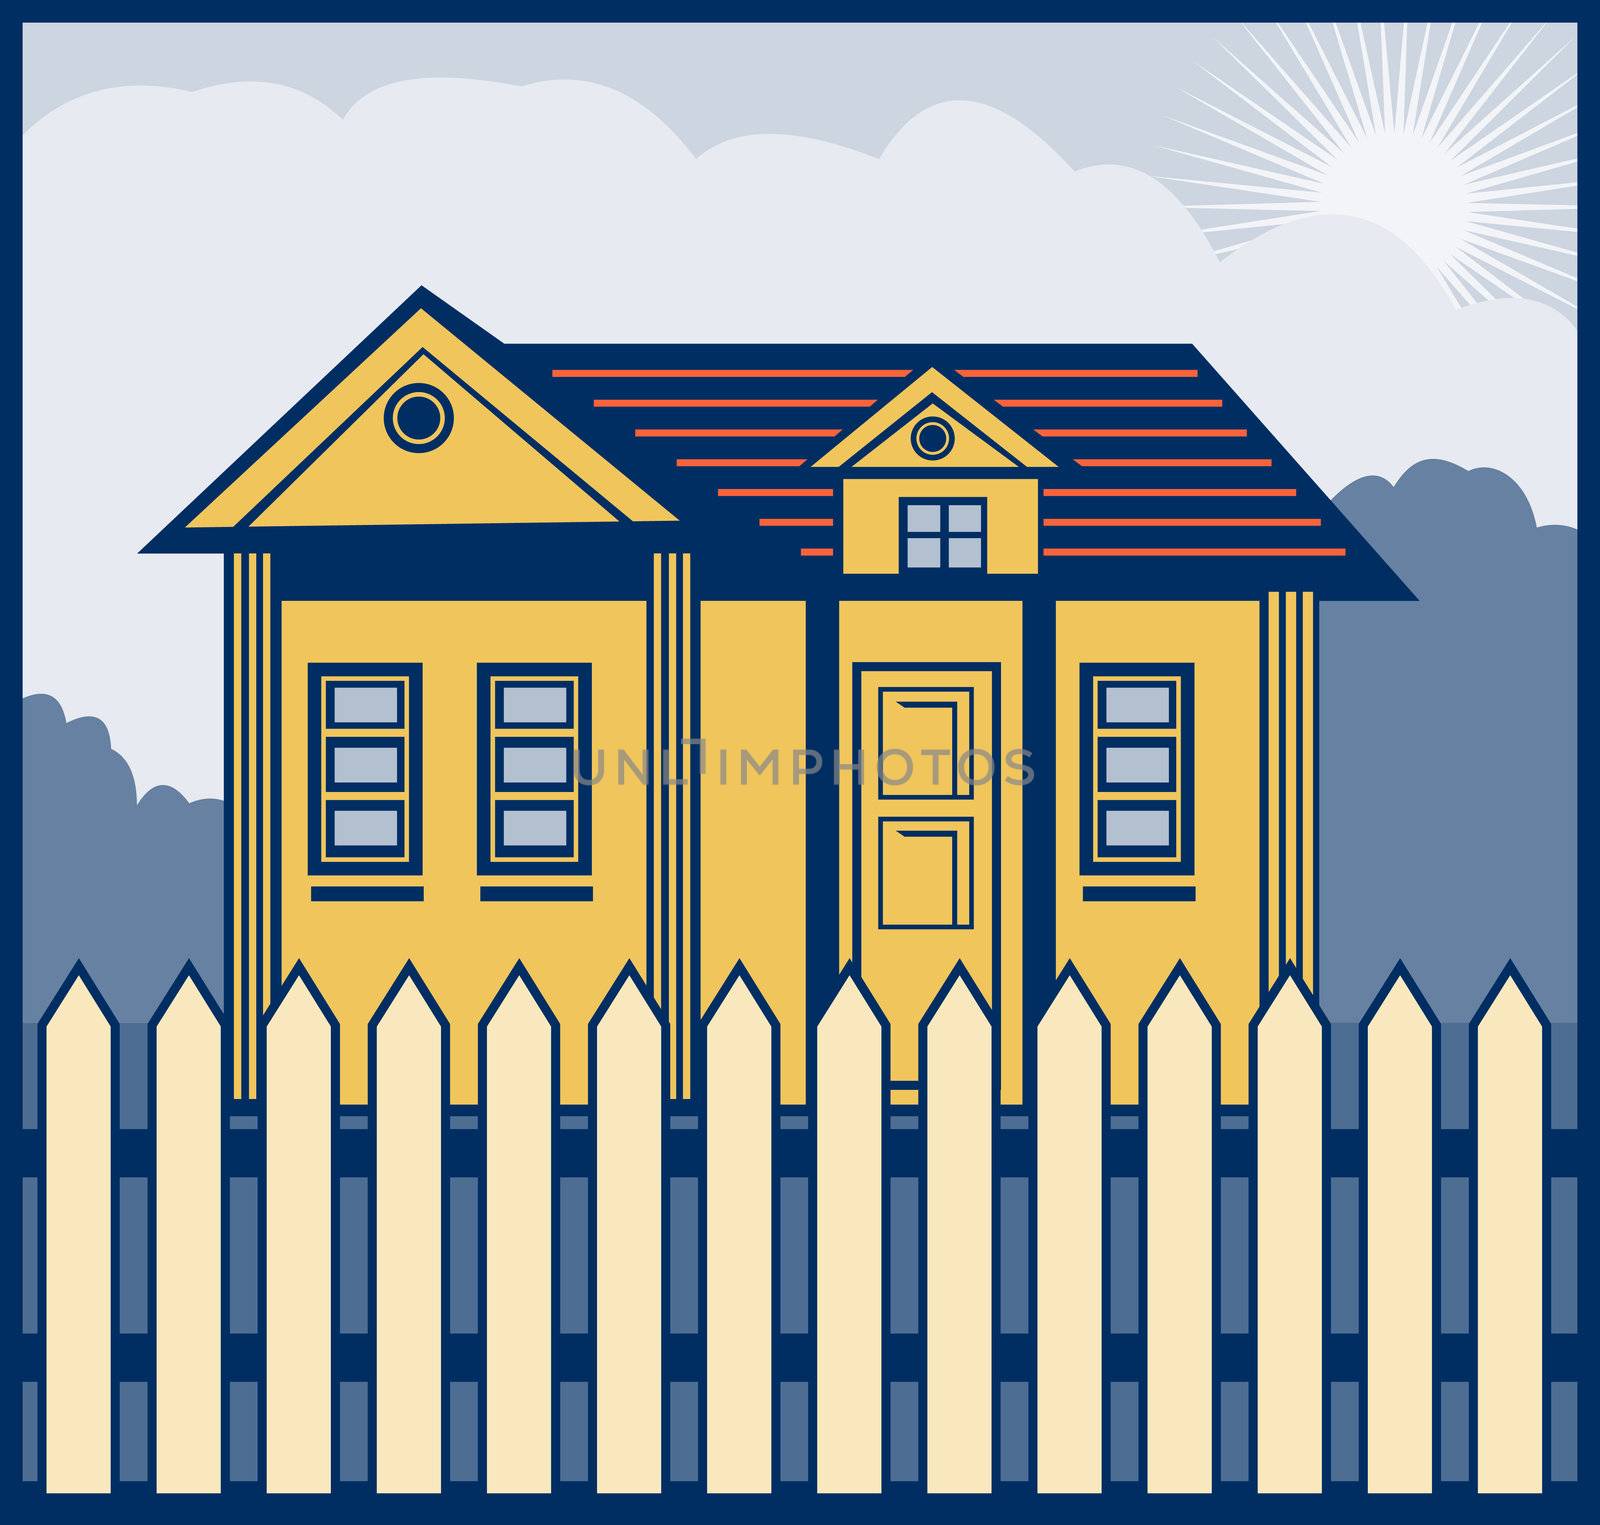 retro style illustration of a house with picket fence